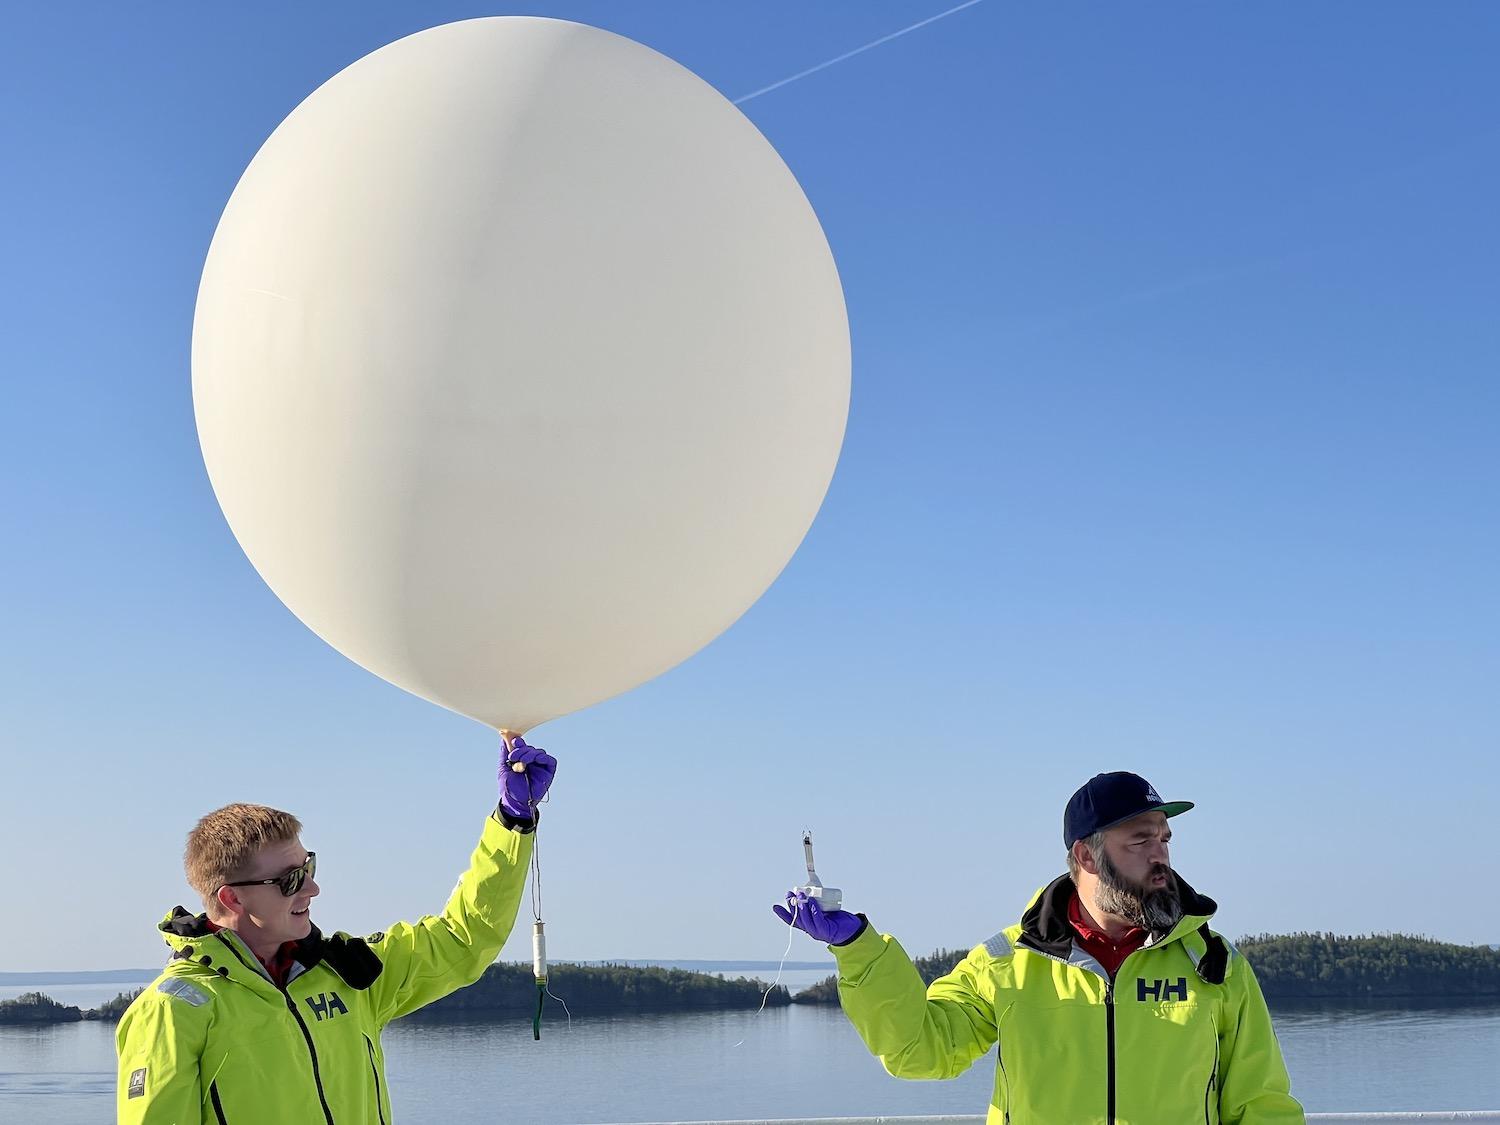 Field scientist Josh Pons, left, and general naturalist Martin Hans, release a weather balloon from the deck of the Viking Octantis while in Lake Superior in June.